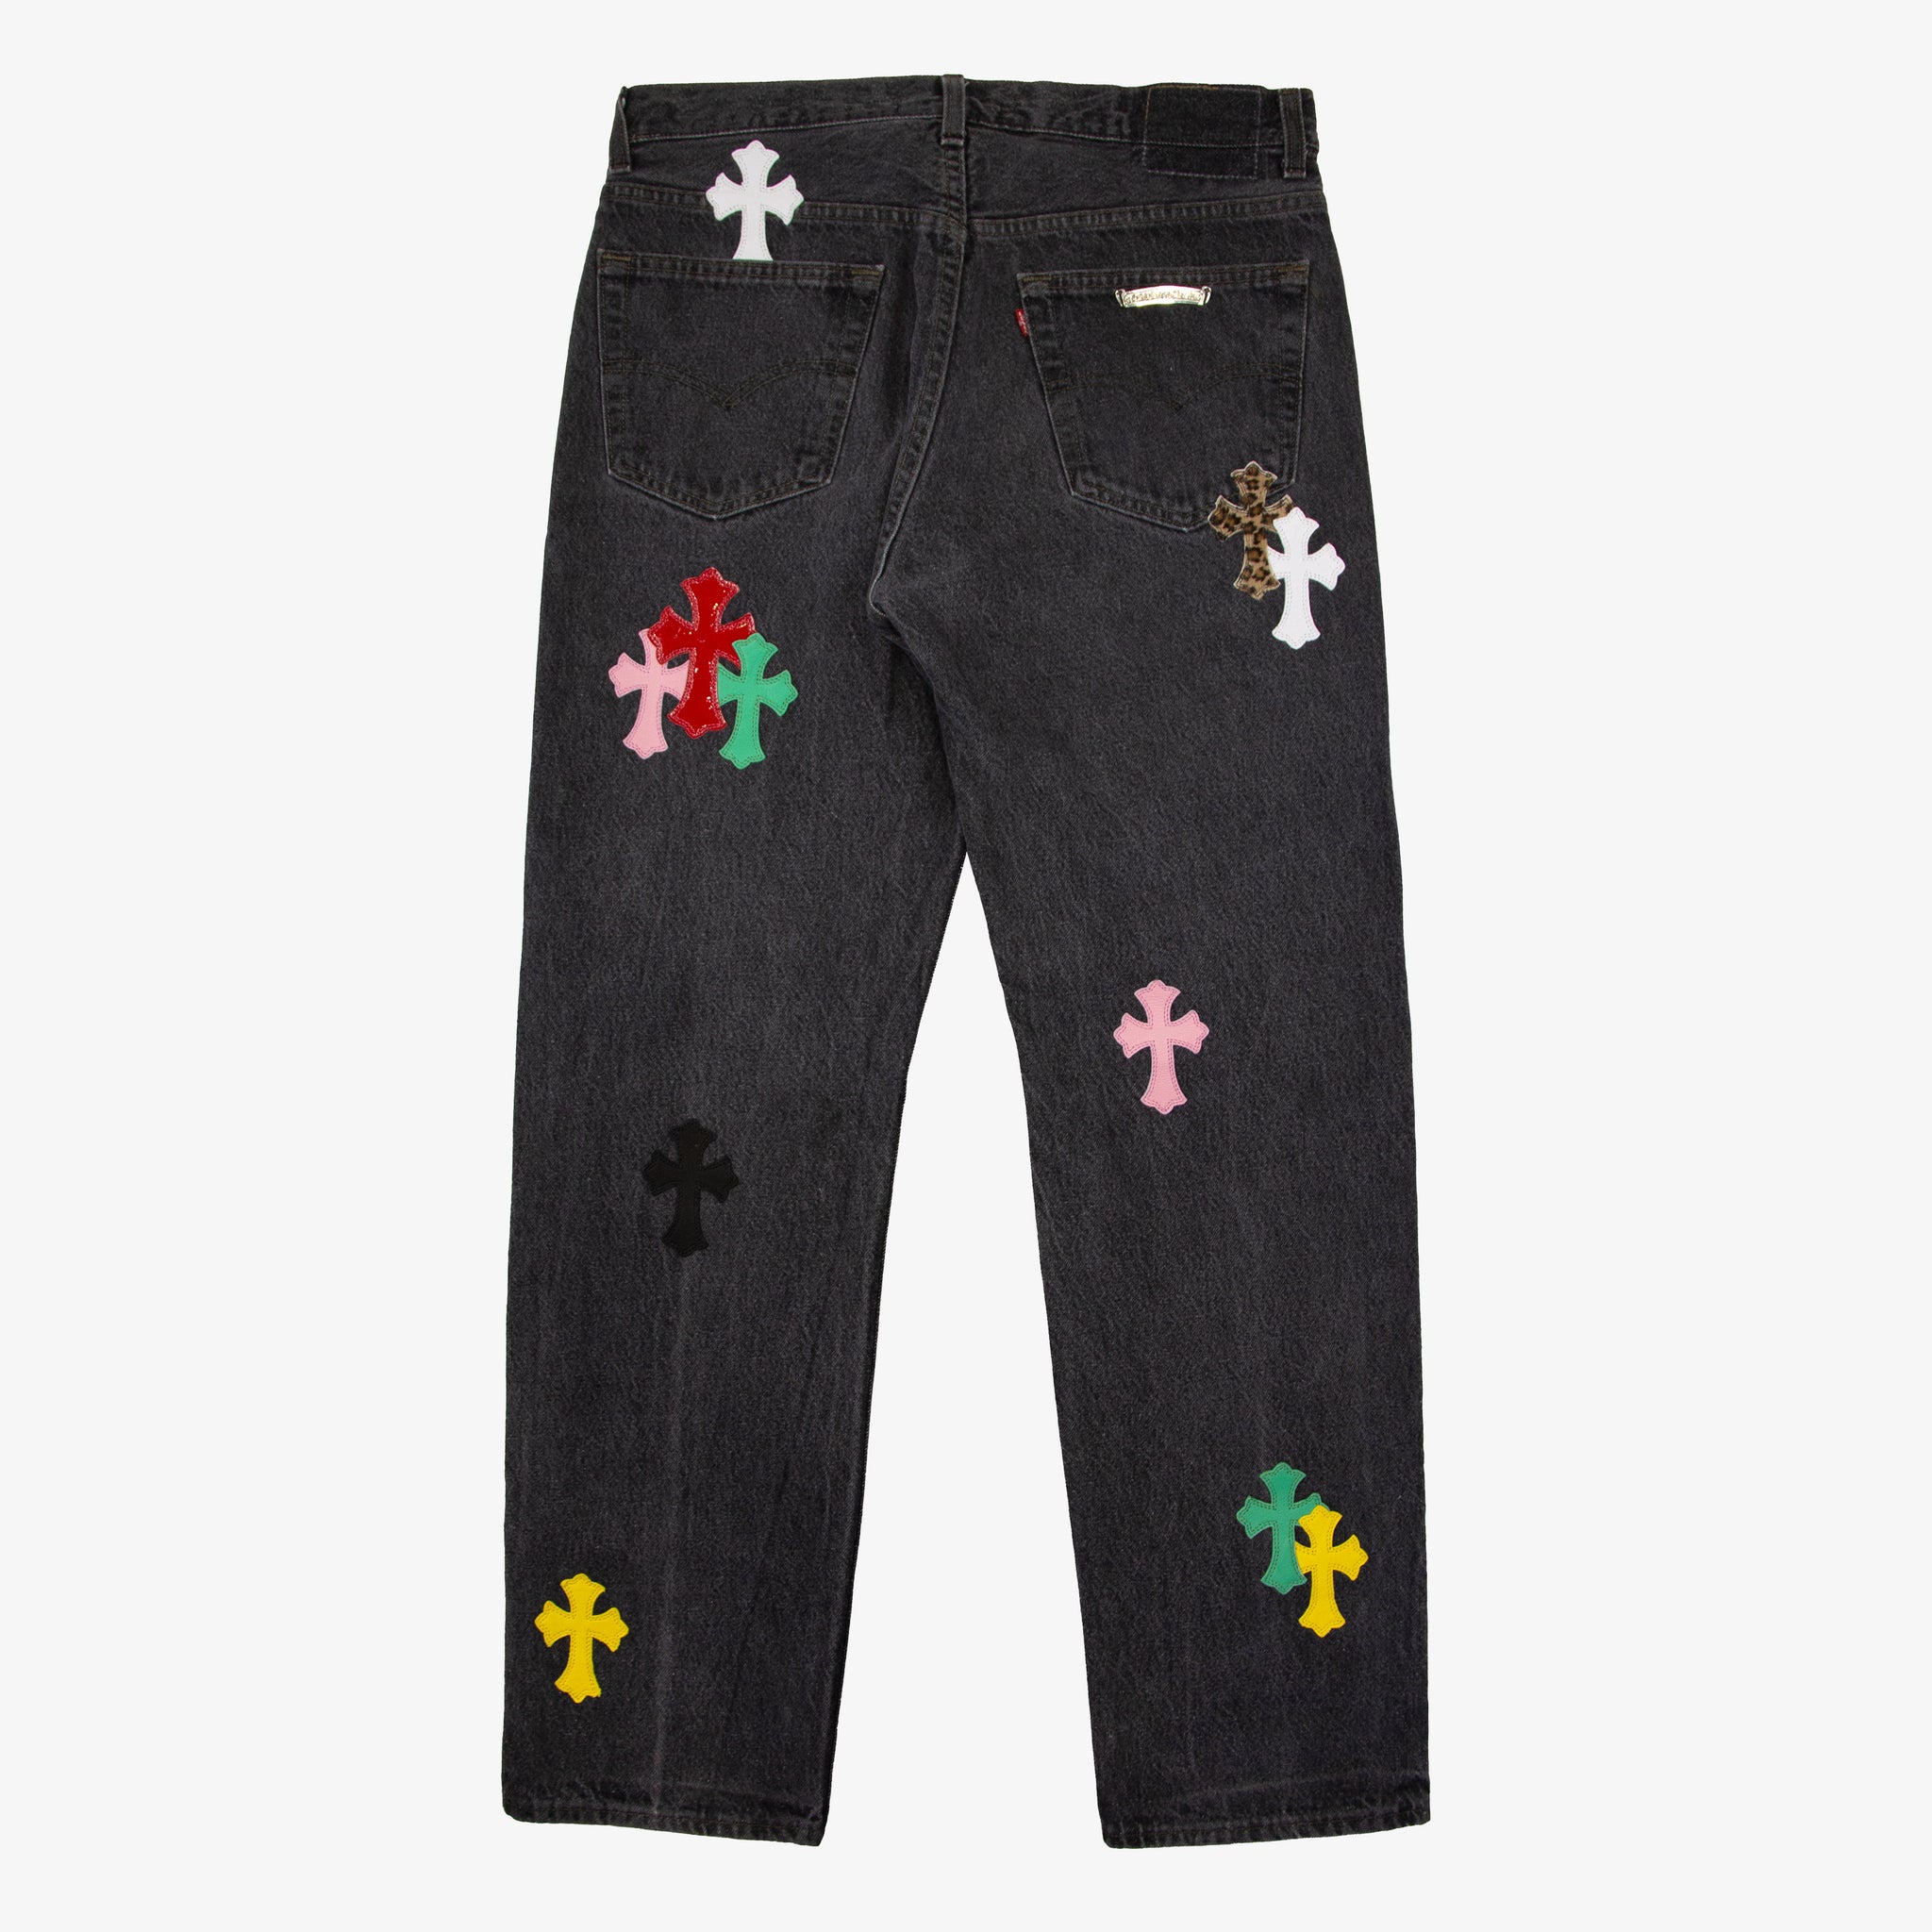 Chrome Hearts Multi-Colored Cross Patches Jeans, WHAT'S ON THE STAR?